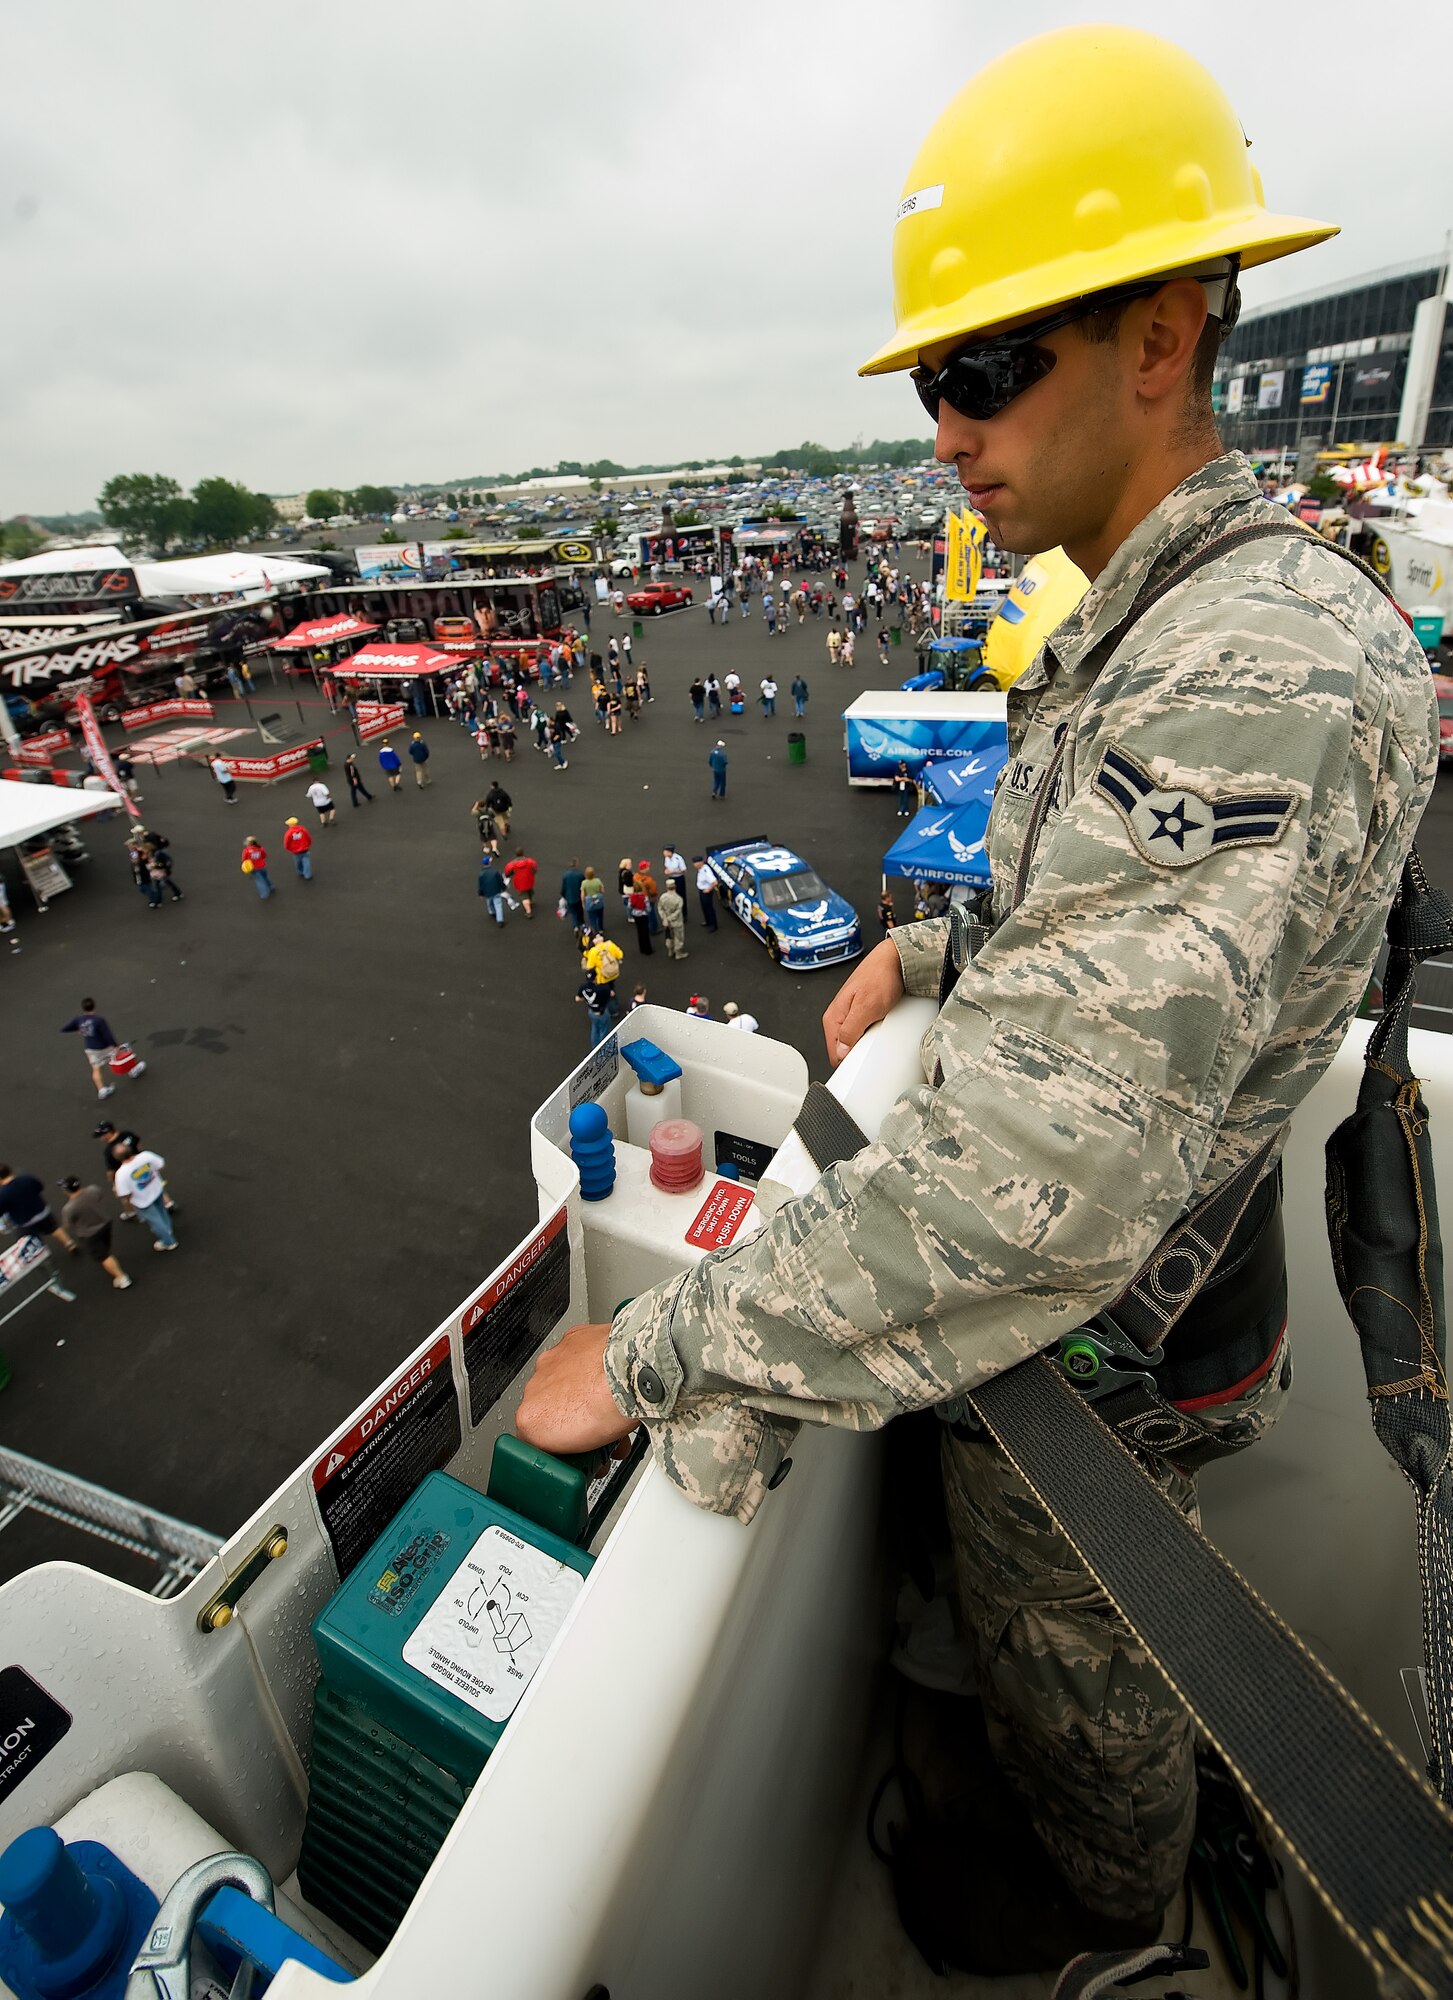 Airman 1st Class Joseph Walters, 436th Civil Engineer Squadron electrician, operates a bucket truck May 15, 2011 at the United Services Organization Military Village at Dover International Speedway, Del. Airman Walters showcased his job for the community at the USO Military Village as part of the NASCAR weekend festivities. (U.S. Air Force photo by Airman 1st Class Jacob Morgan)